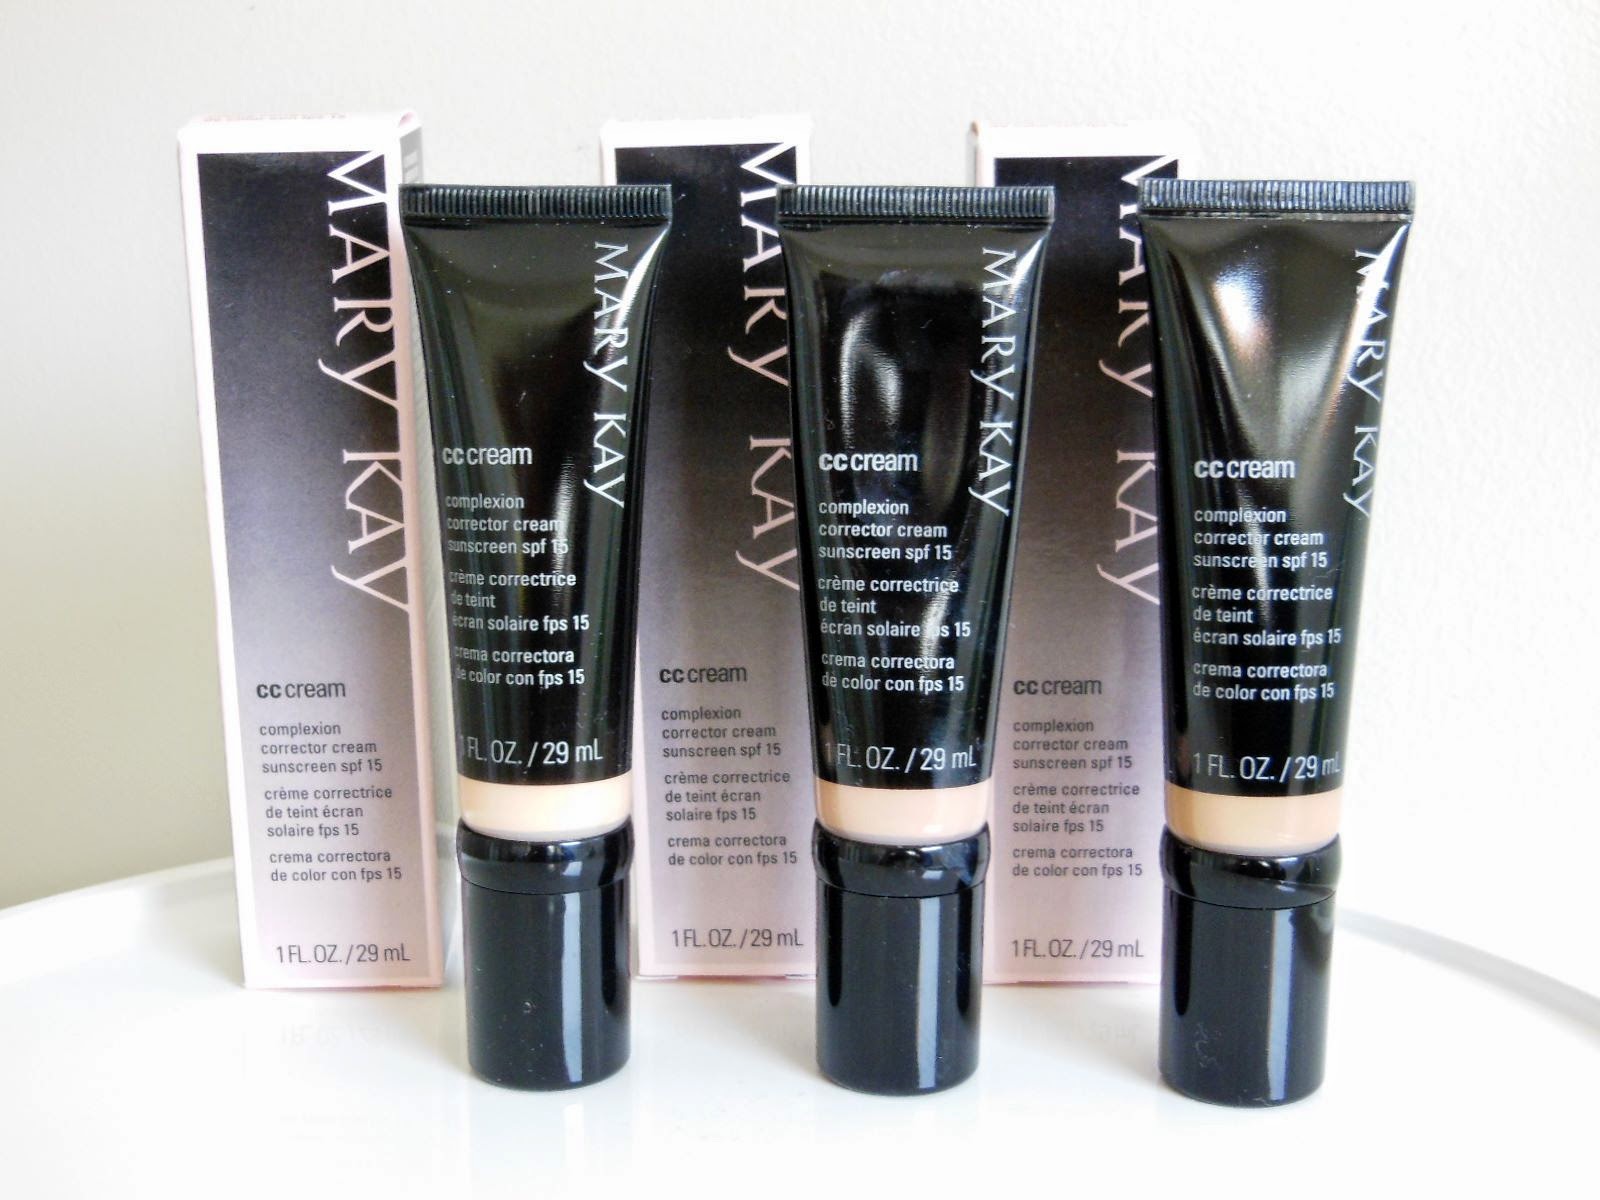 The Beauty &amp; Lifestyle Hunter: PRODUCT REVIEW: MARY KAY CC CREAM